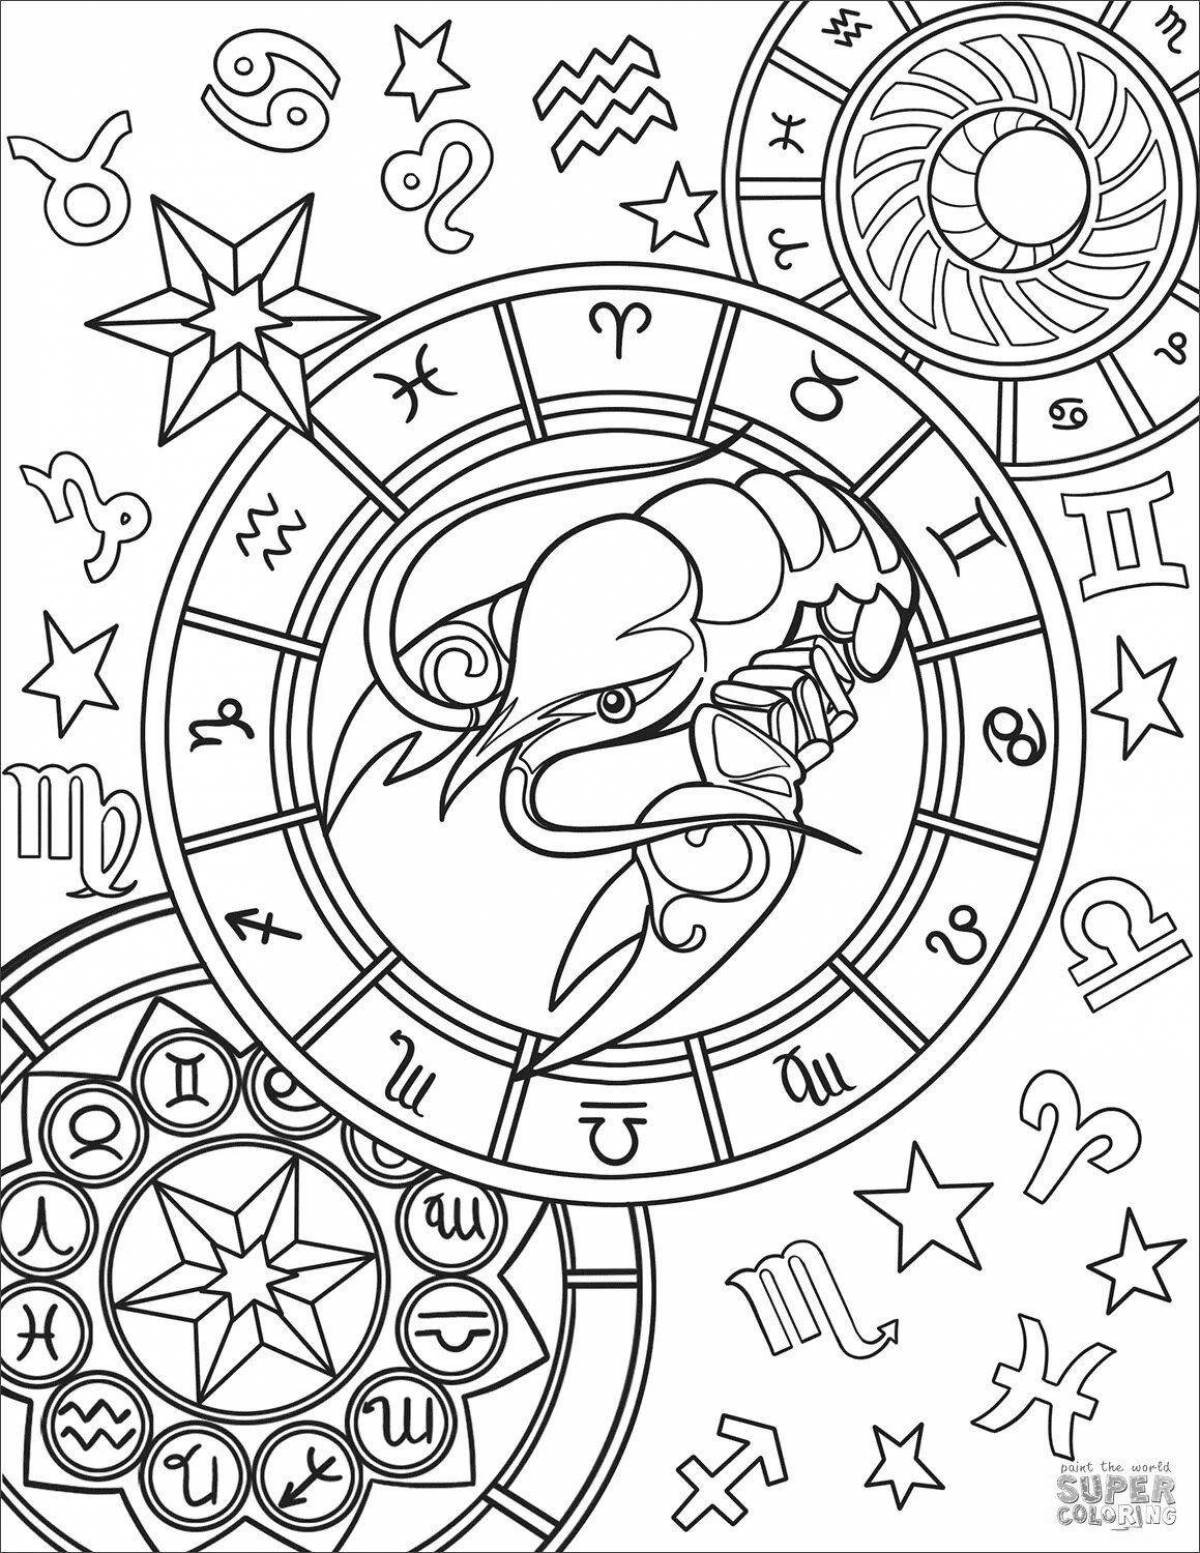 Fabulous cancer coloring page